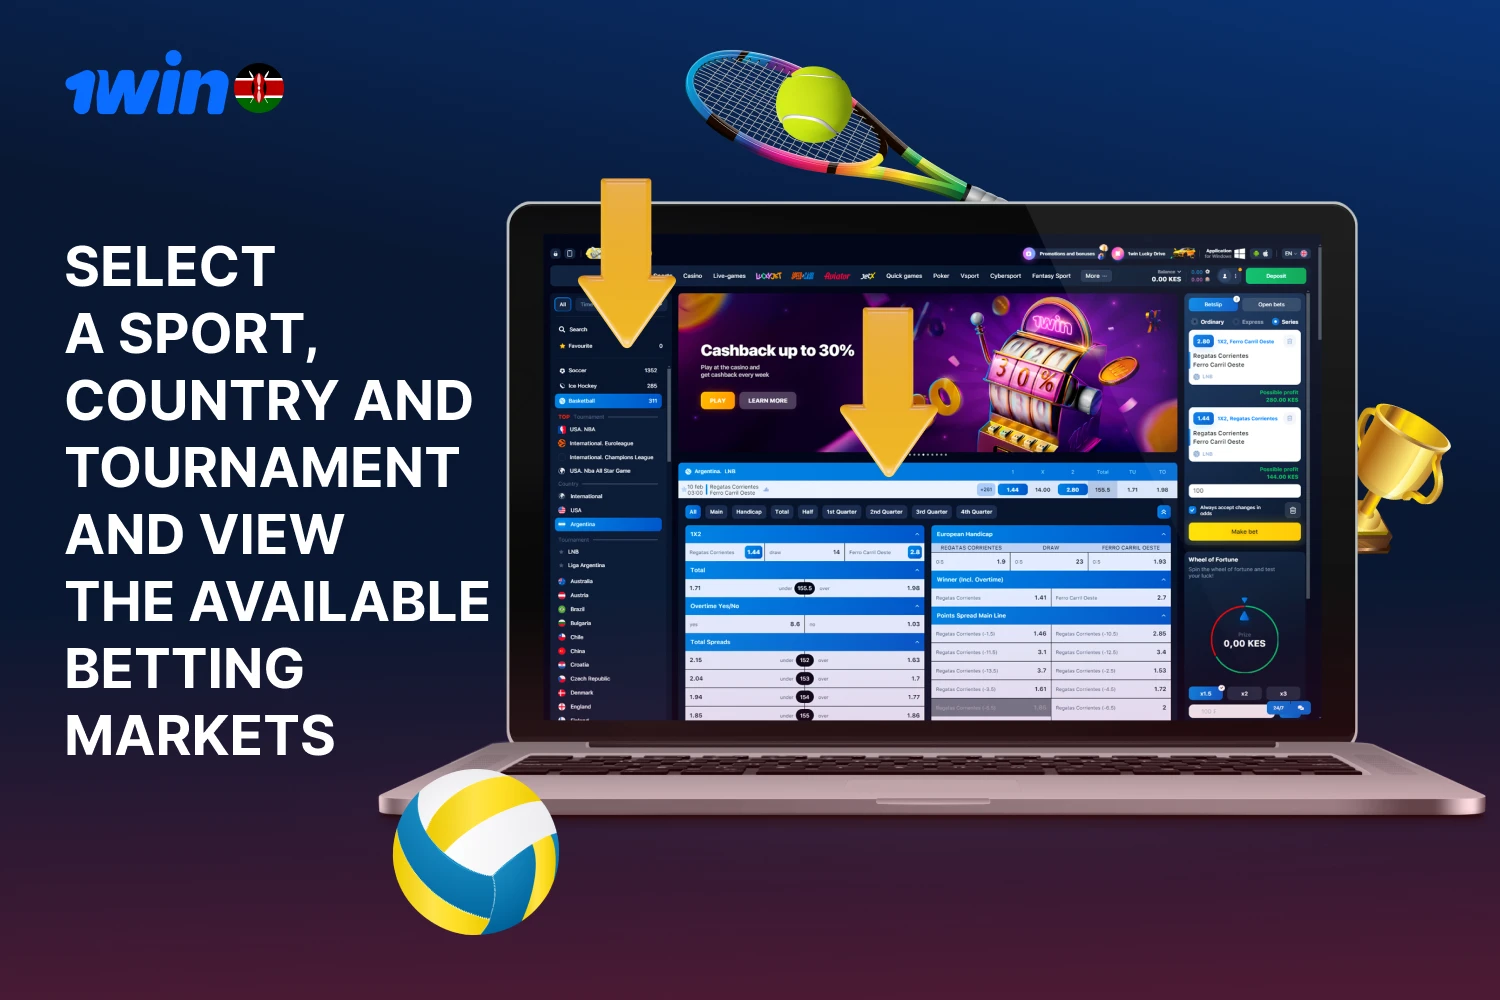 Select a sport, country and tournament and view the available betting markets on the 1win Kenya platform